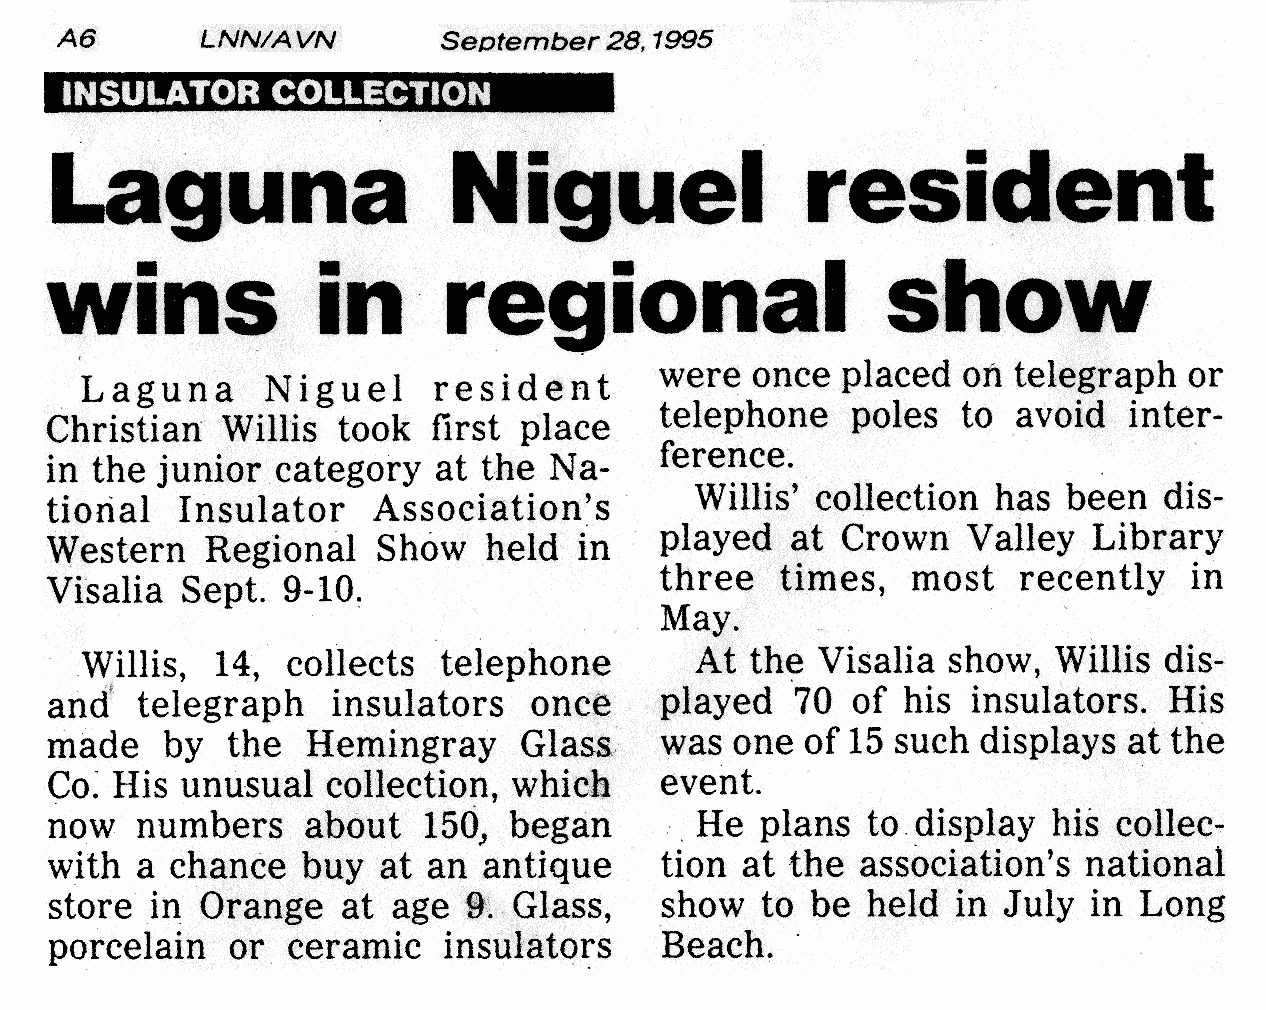 My dad contacted our local Laguna Niguel, CA newspaper.